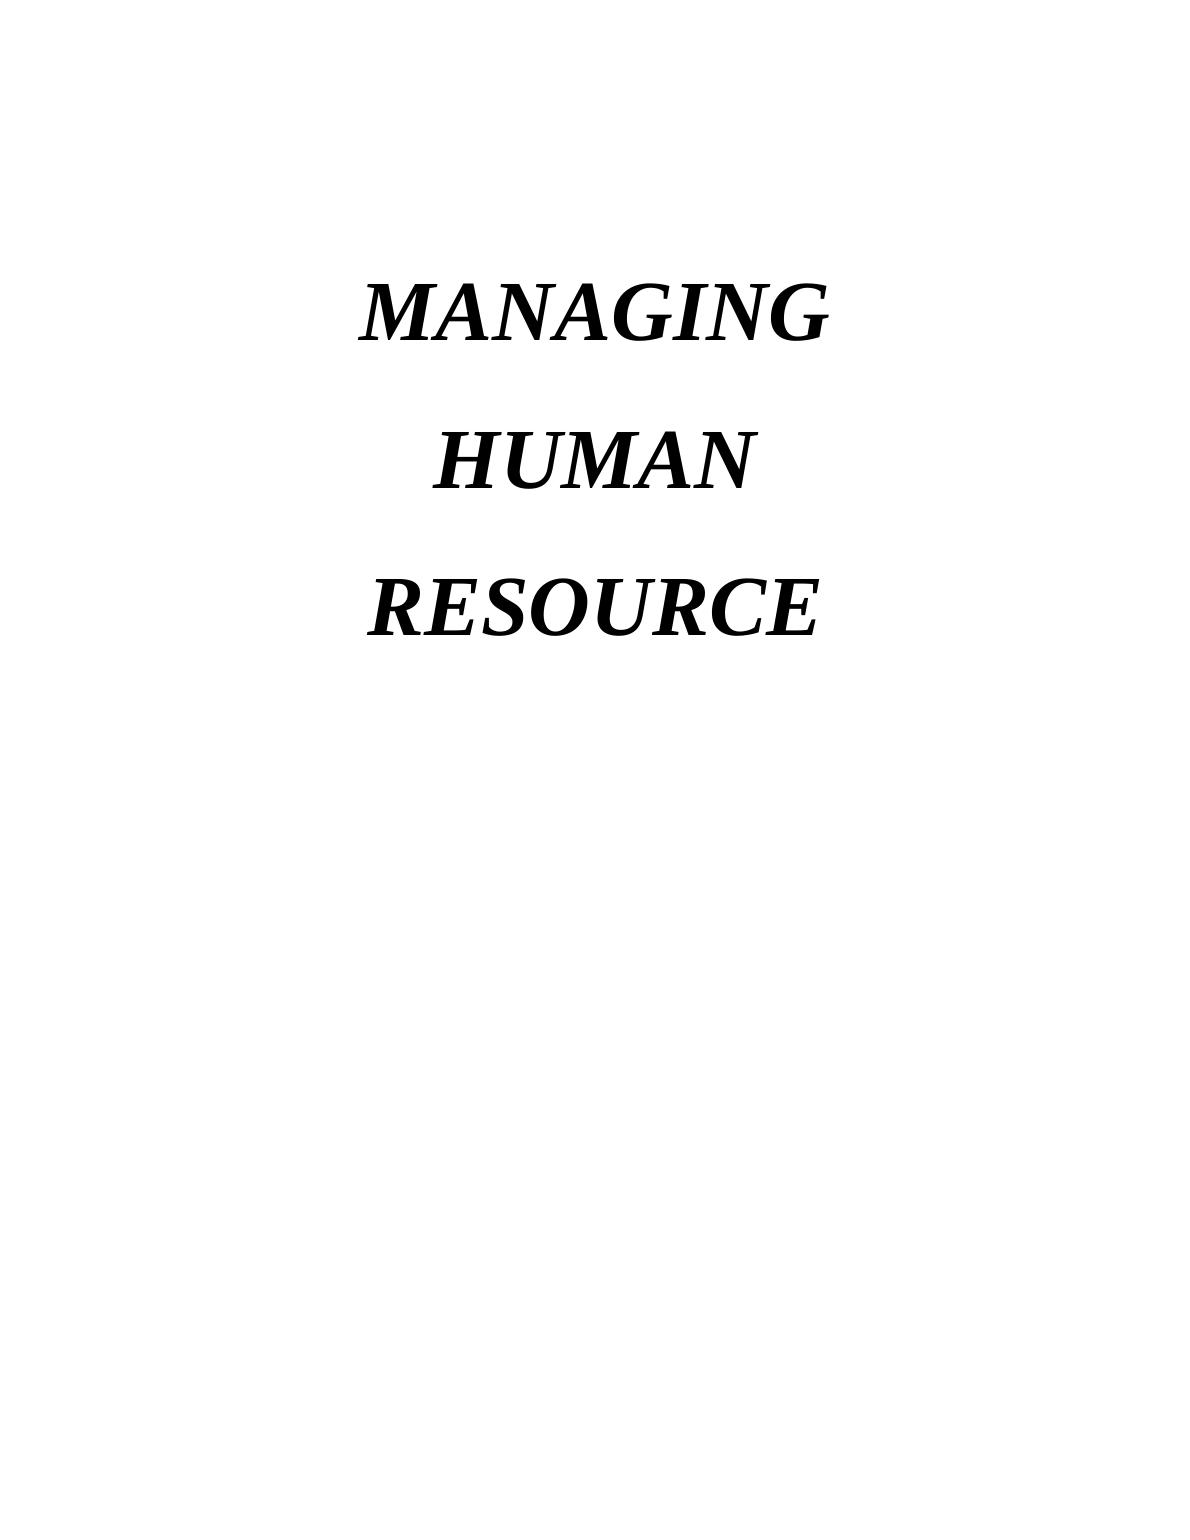 Managing Human Resource Assignment Solved_1